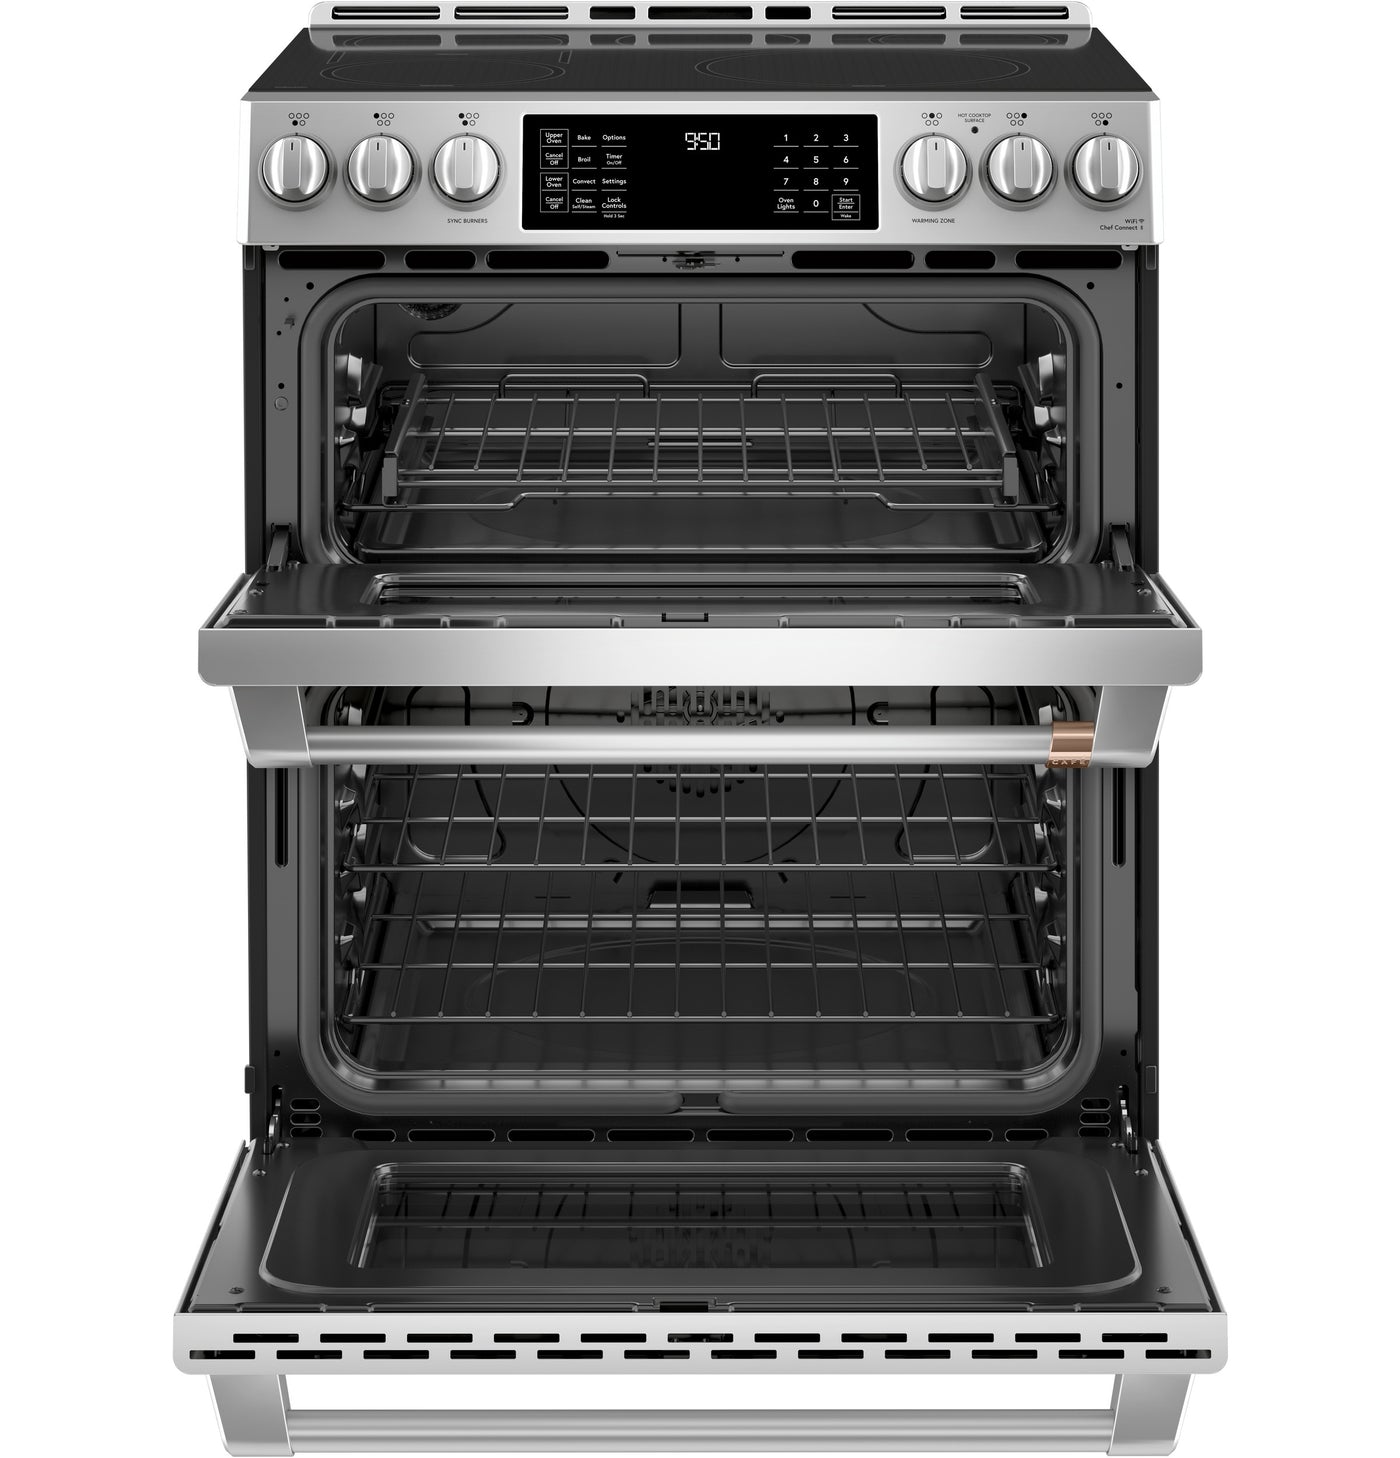 Café™ Stainless Steel 30" Slide-In Front Control Induction and Convection Double Oven Range (7.0 Cu.Ft) - CCHS950P2MS1